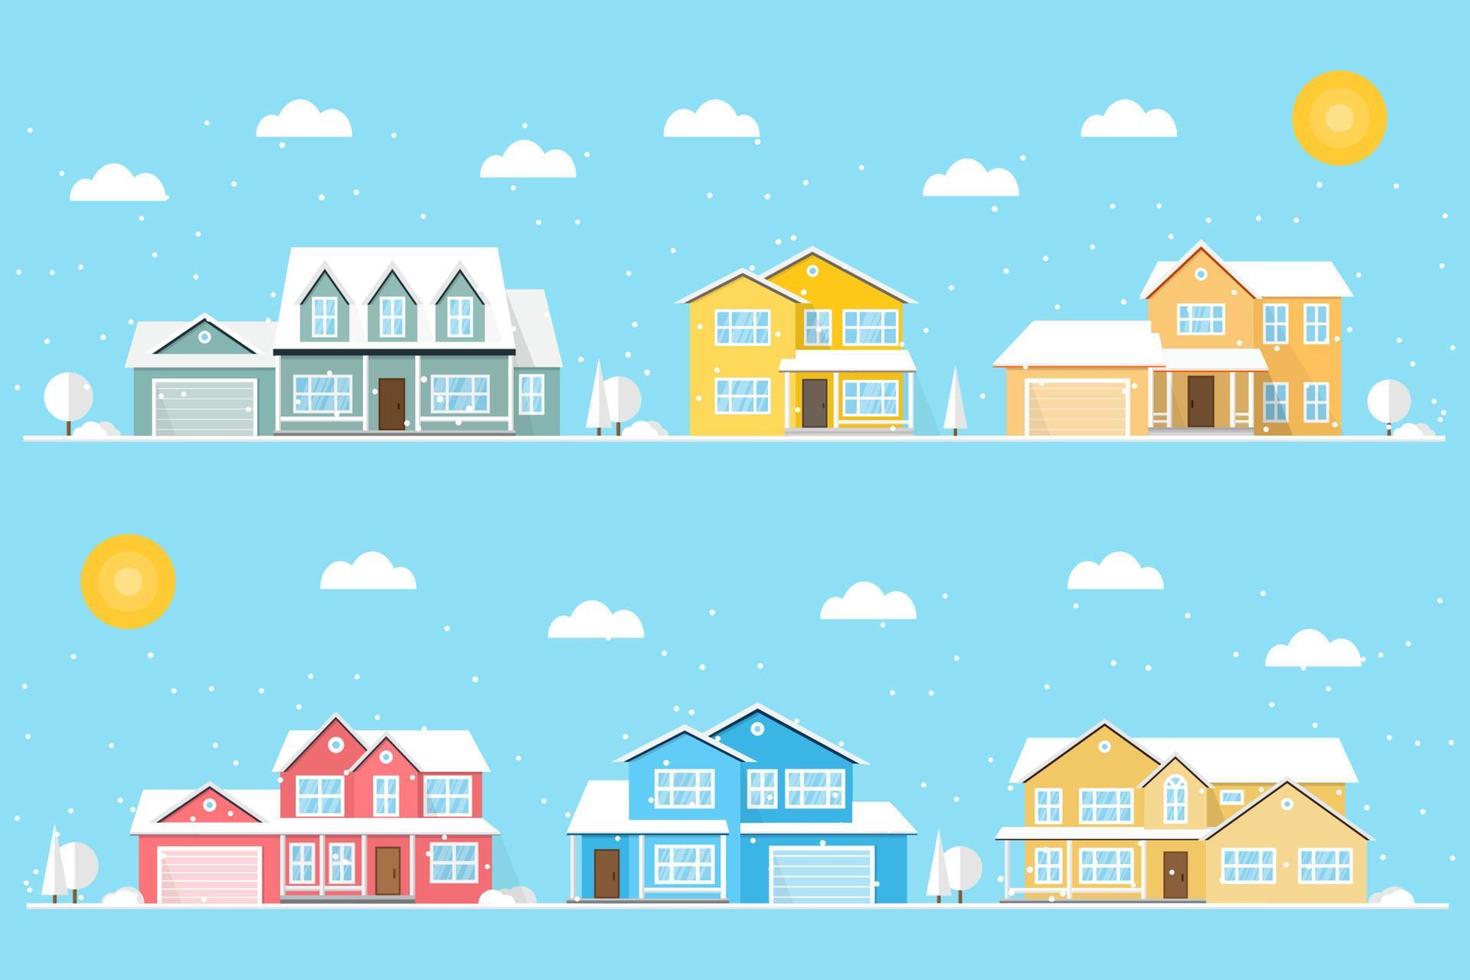 Neighborhood with homes and snowflakes illustrated on the blue background. vector